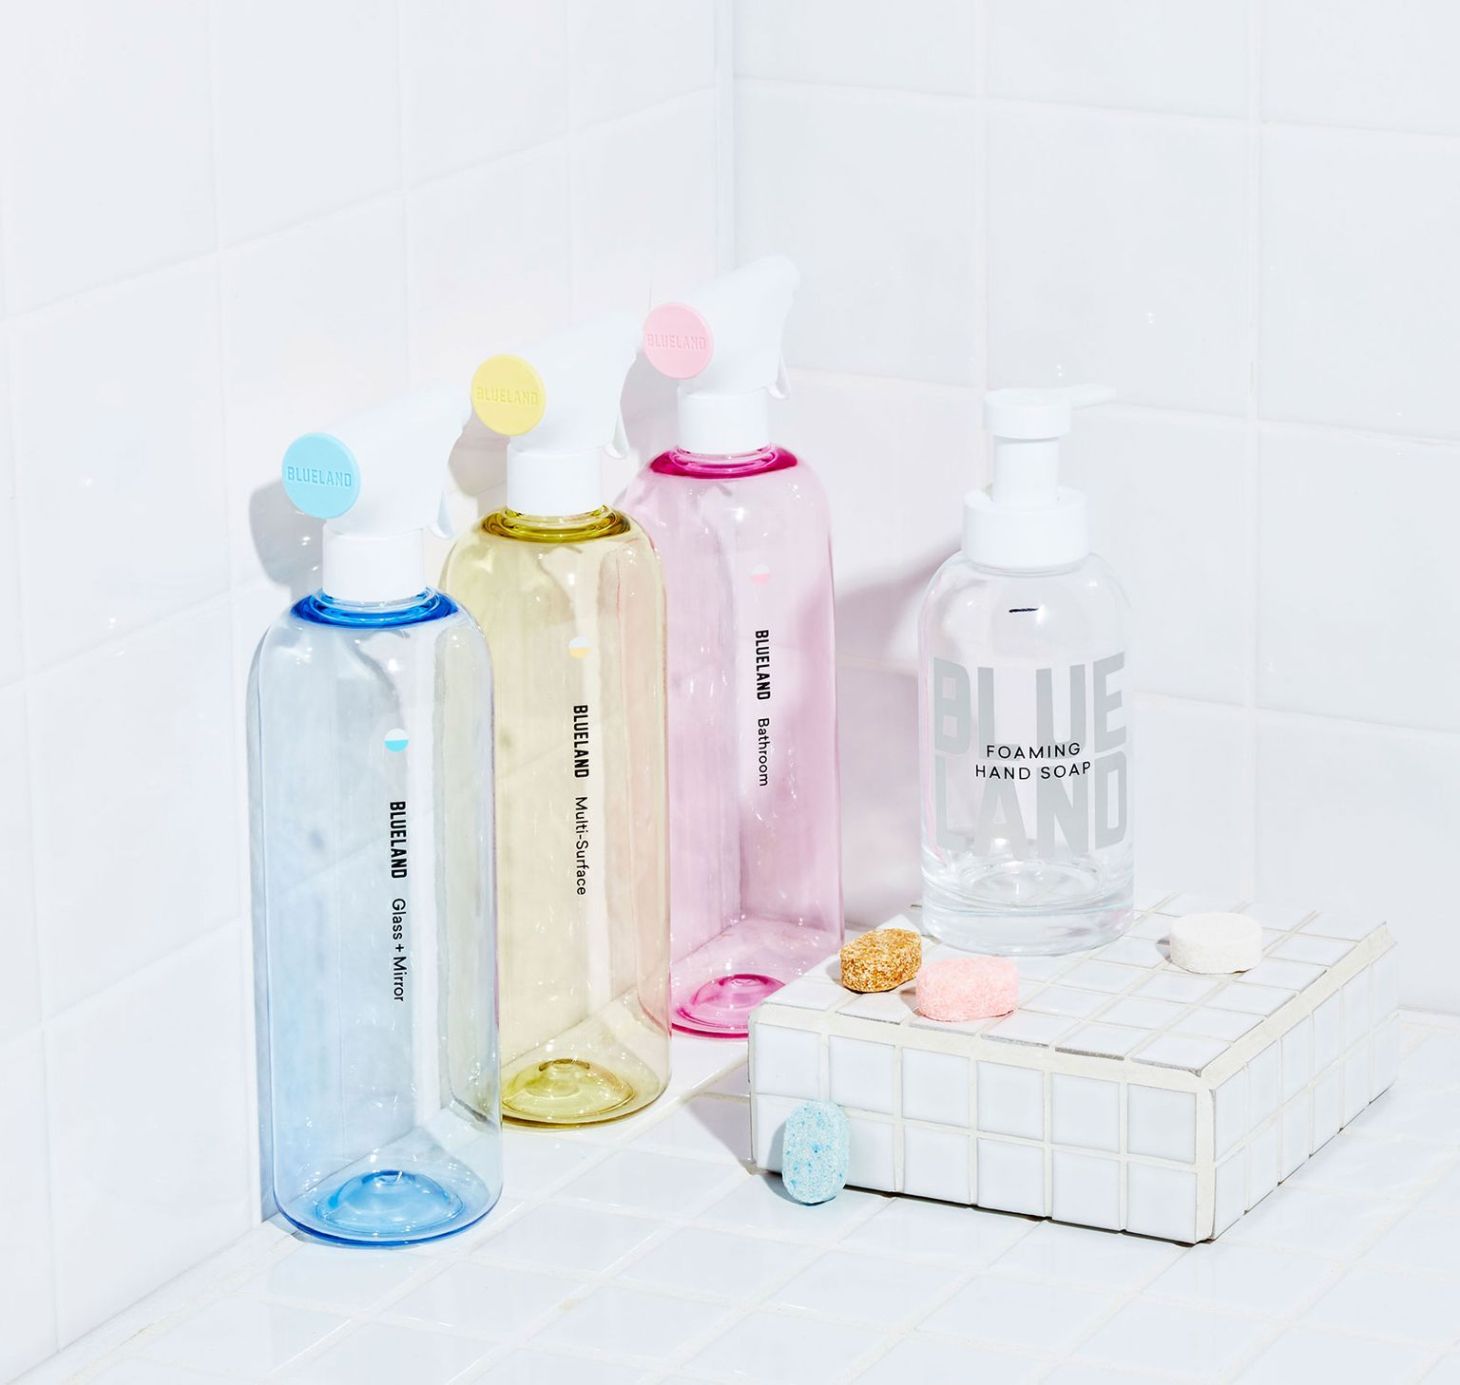 blueland clean essentials glass bottles and tablets